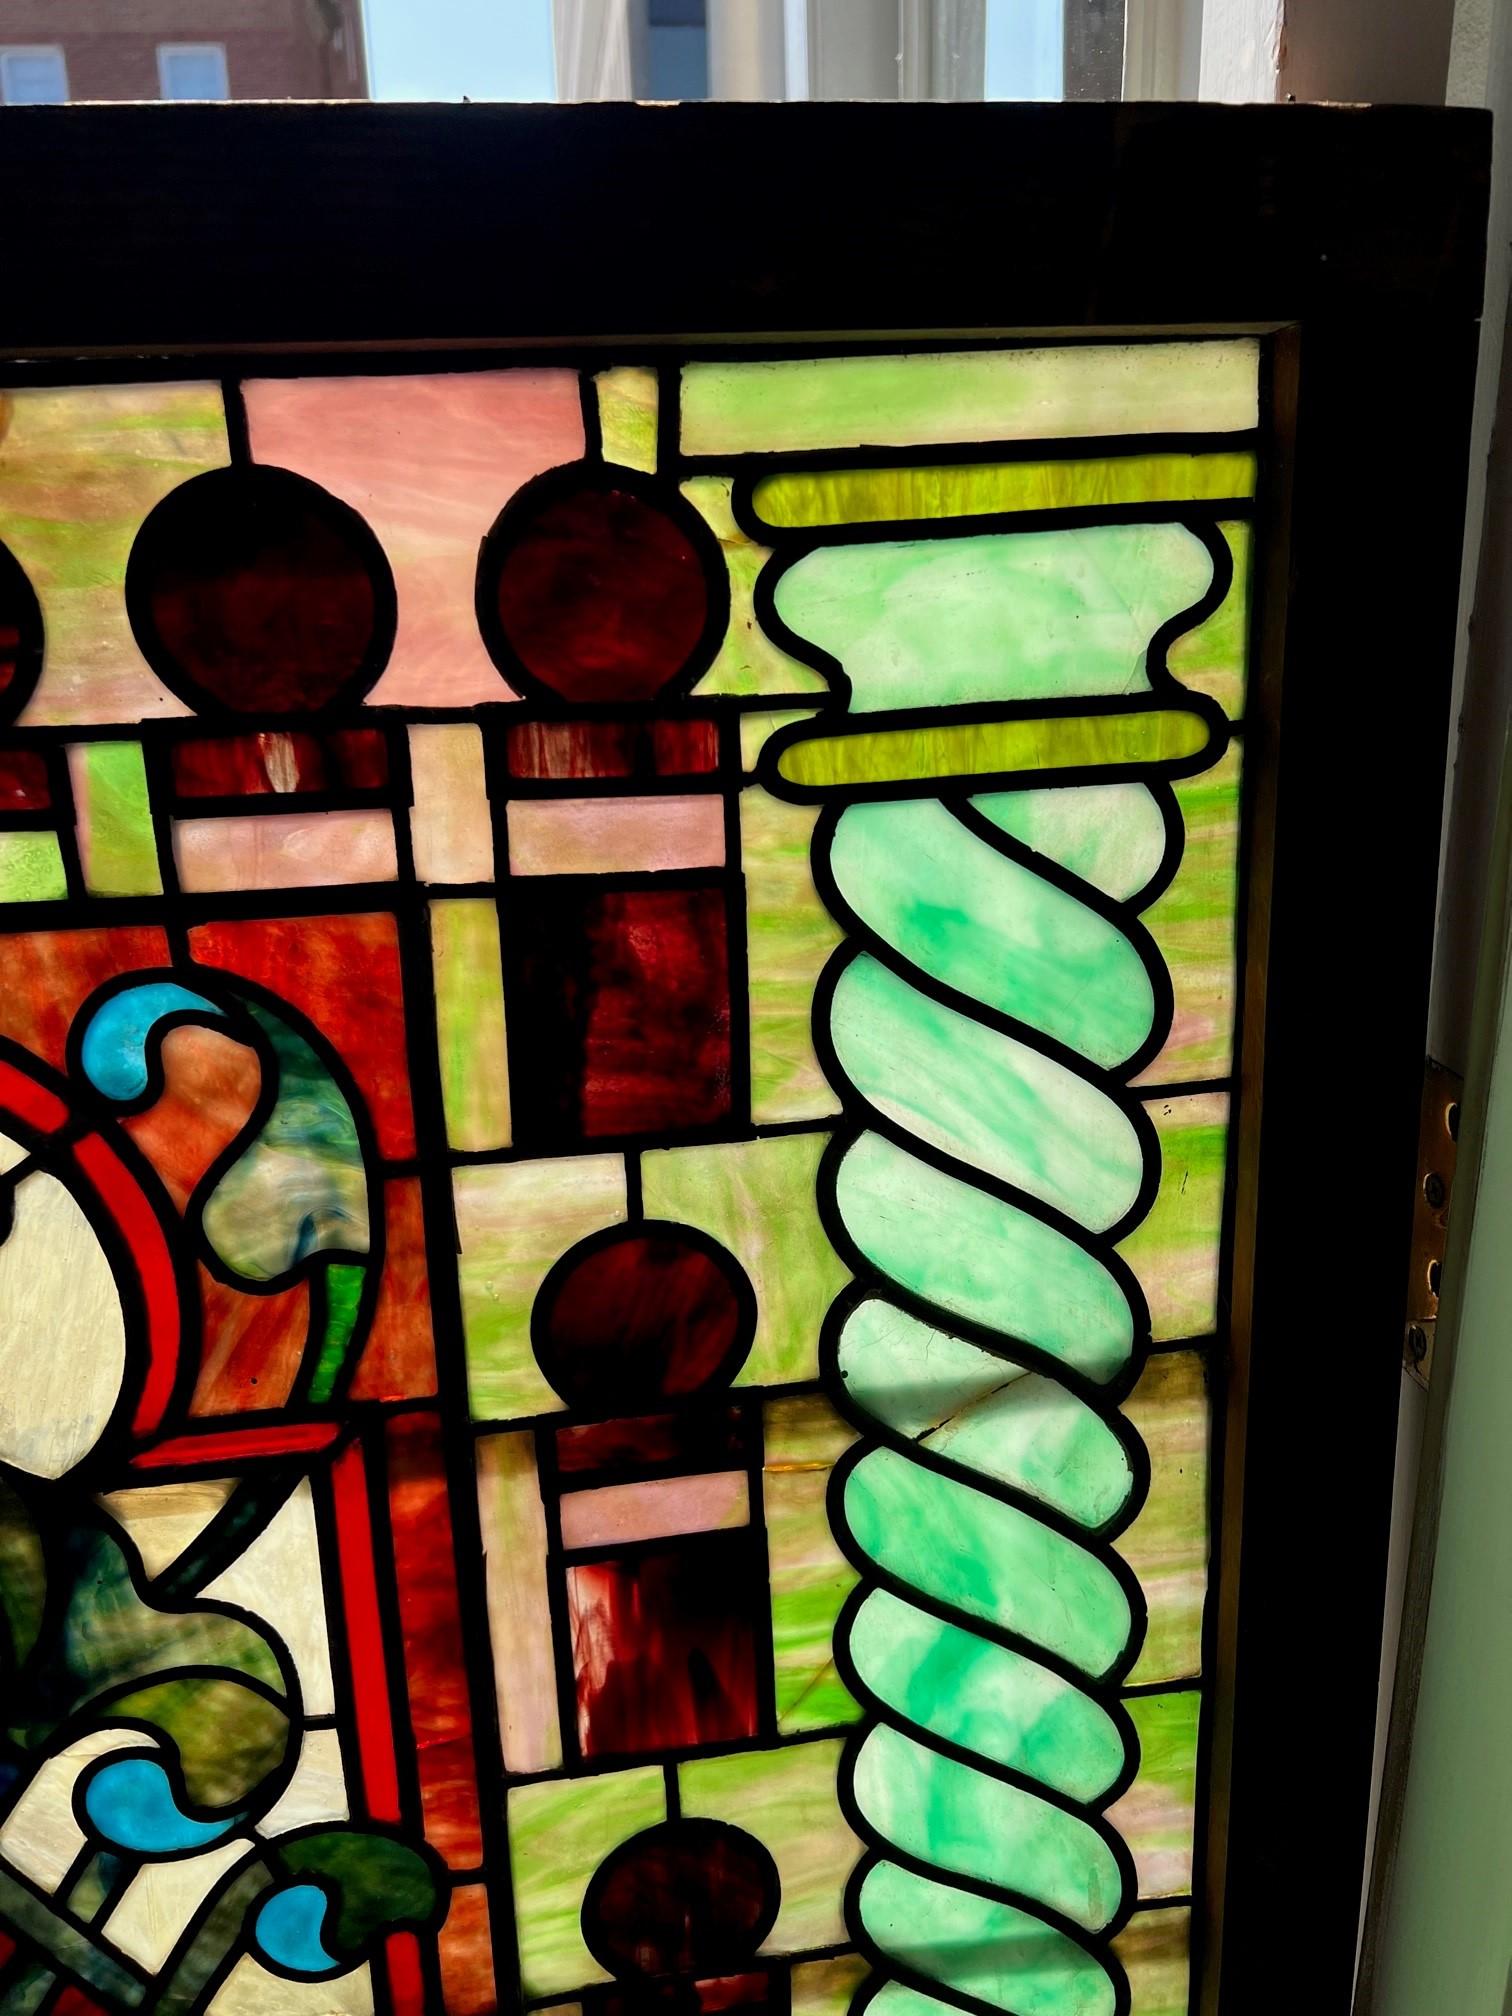 Beautiful late 19th Century antique stained glass window from a Connecticut estate. This window has great colors that look amazing in the sunlight. Not sure where the stained glass was originally, but its a very interesting window with the twisted